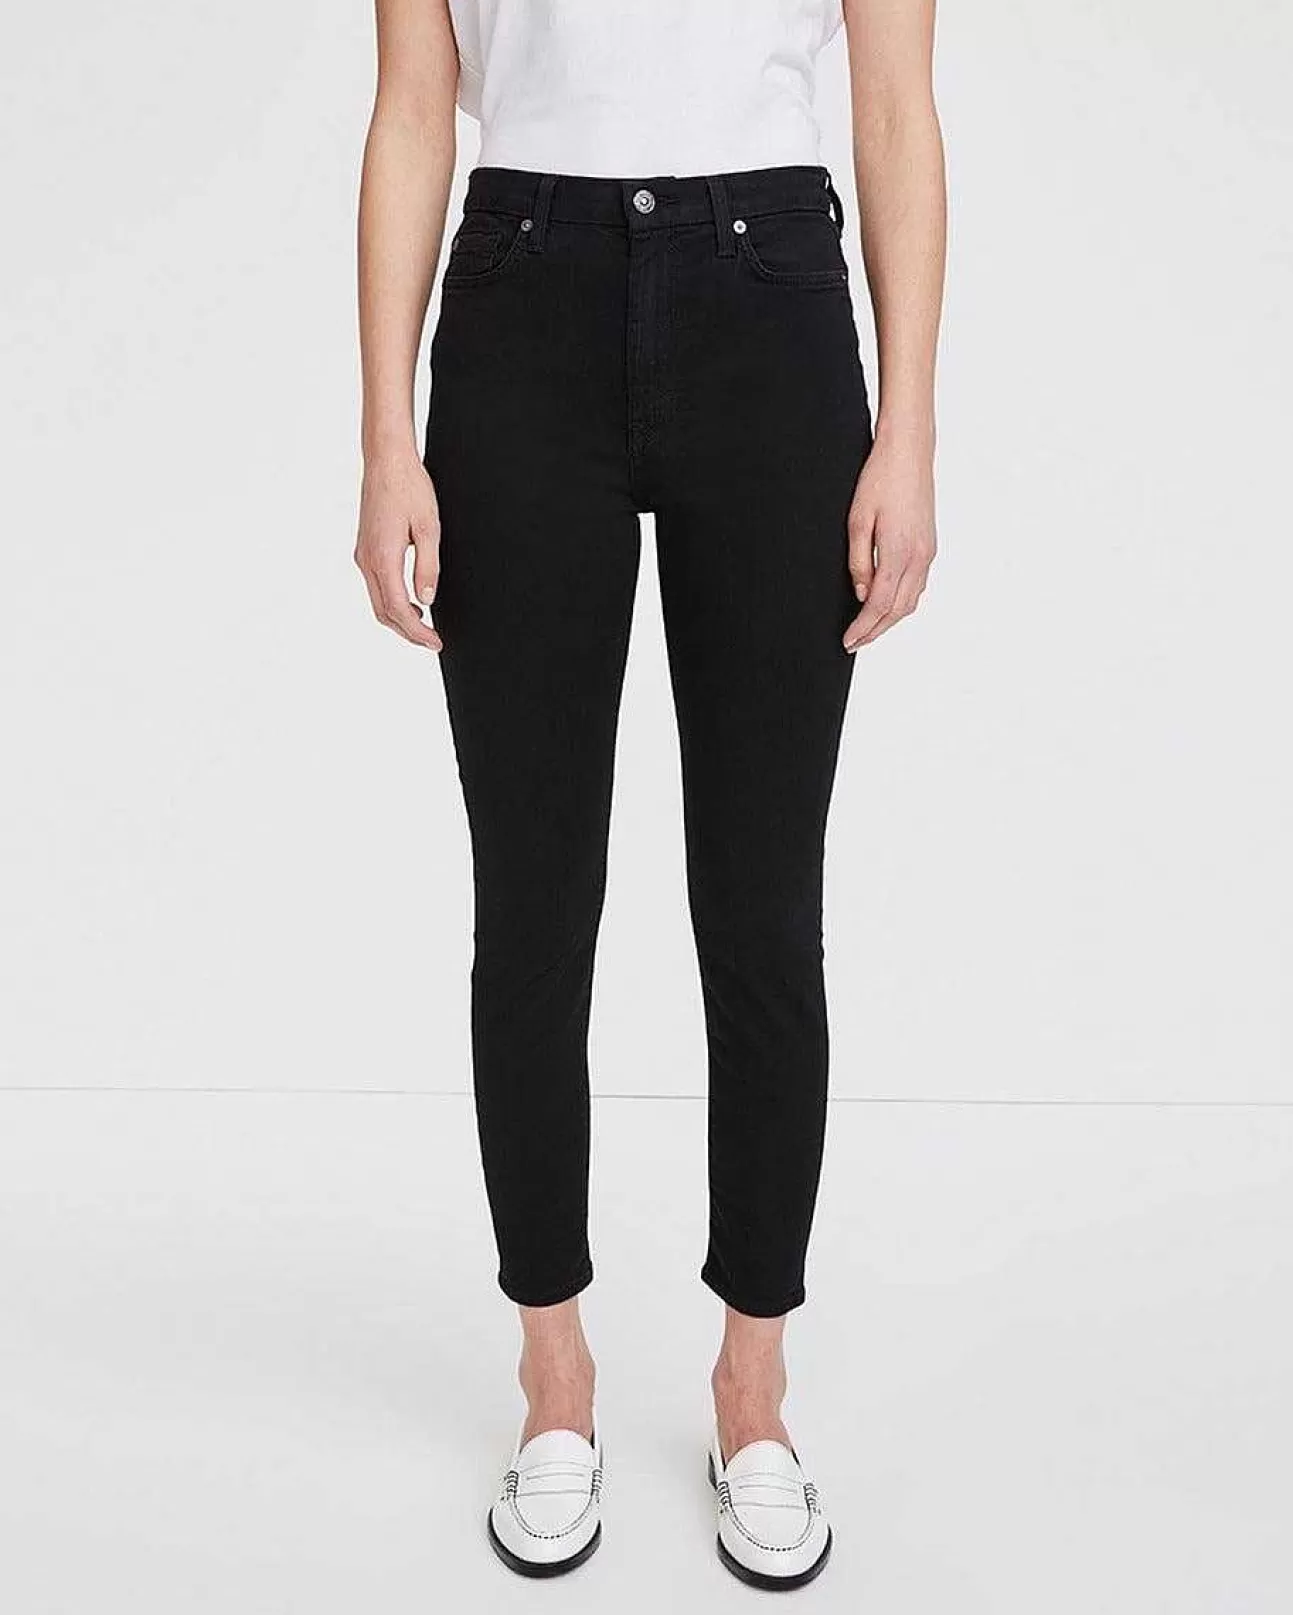 Jeans>7 For All Mankind B(Air) Ankle Skinny Mit Hoher Taille In Schwarz Bairblack